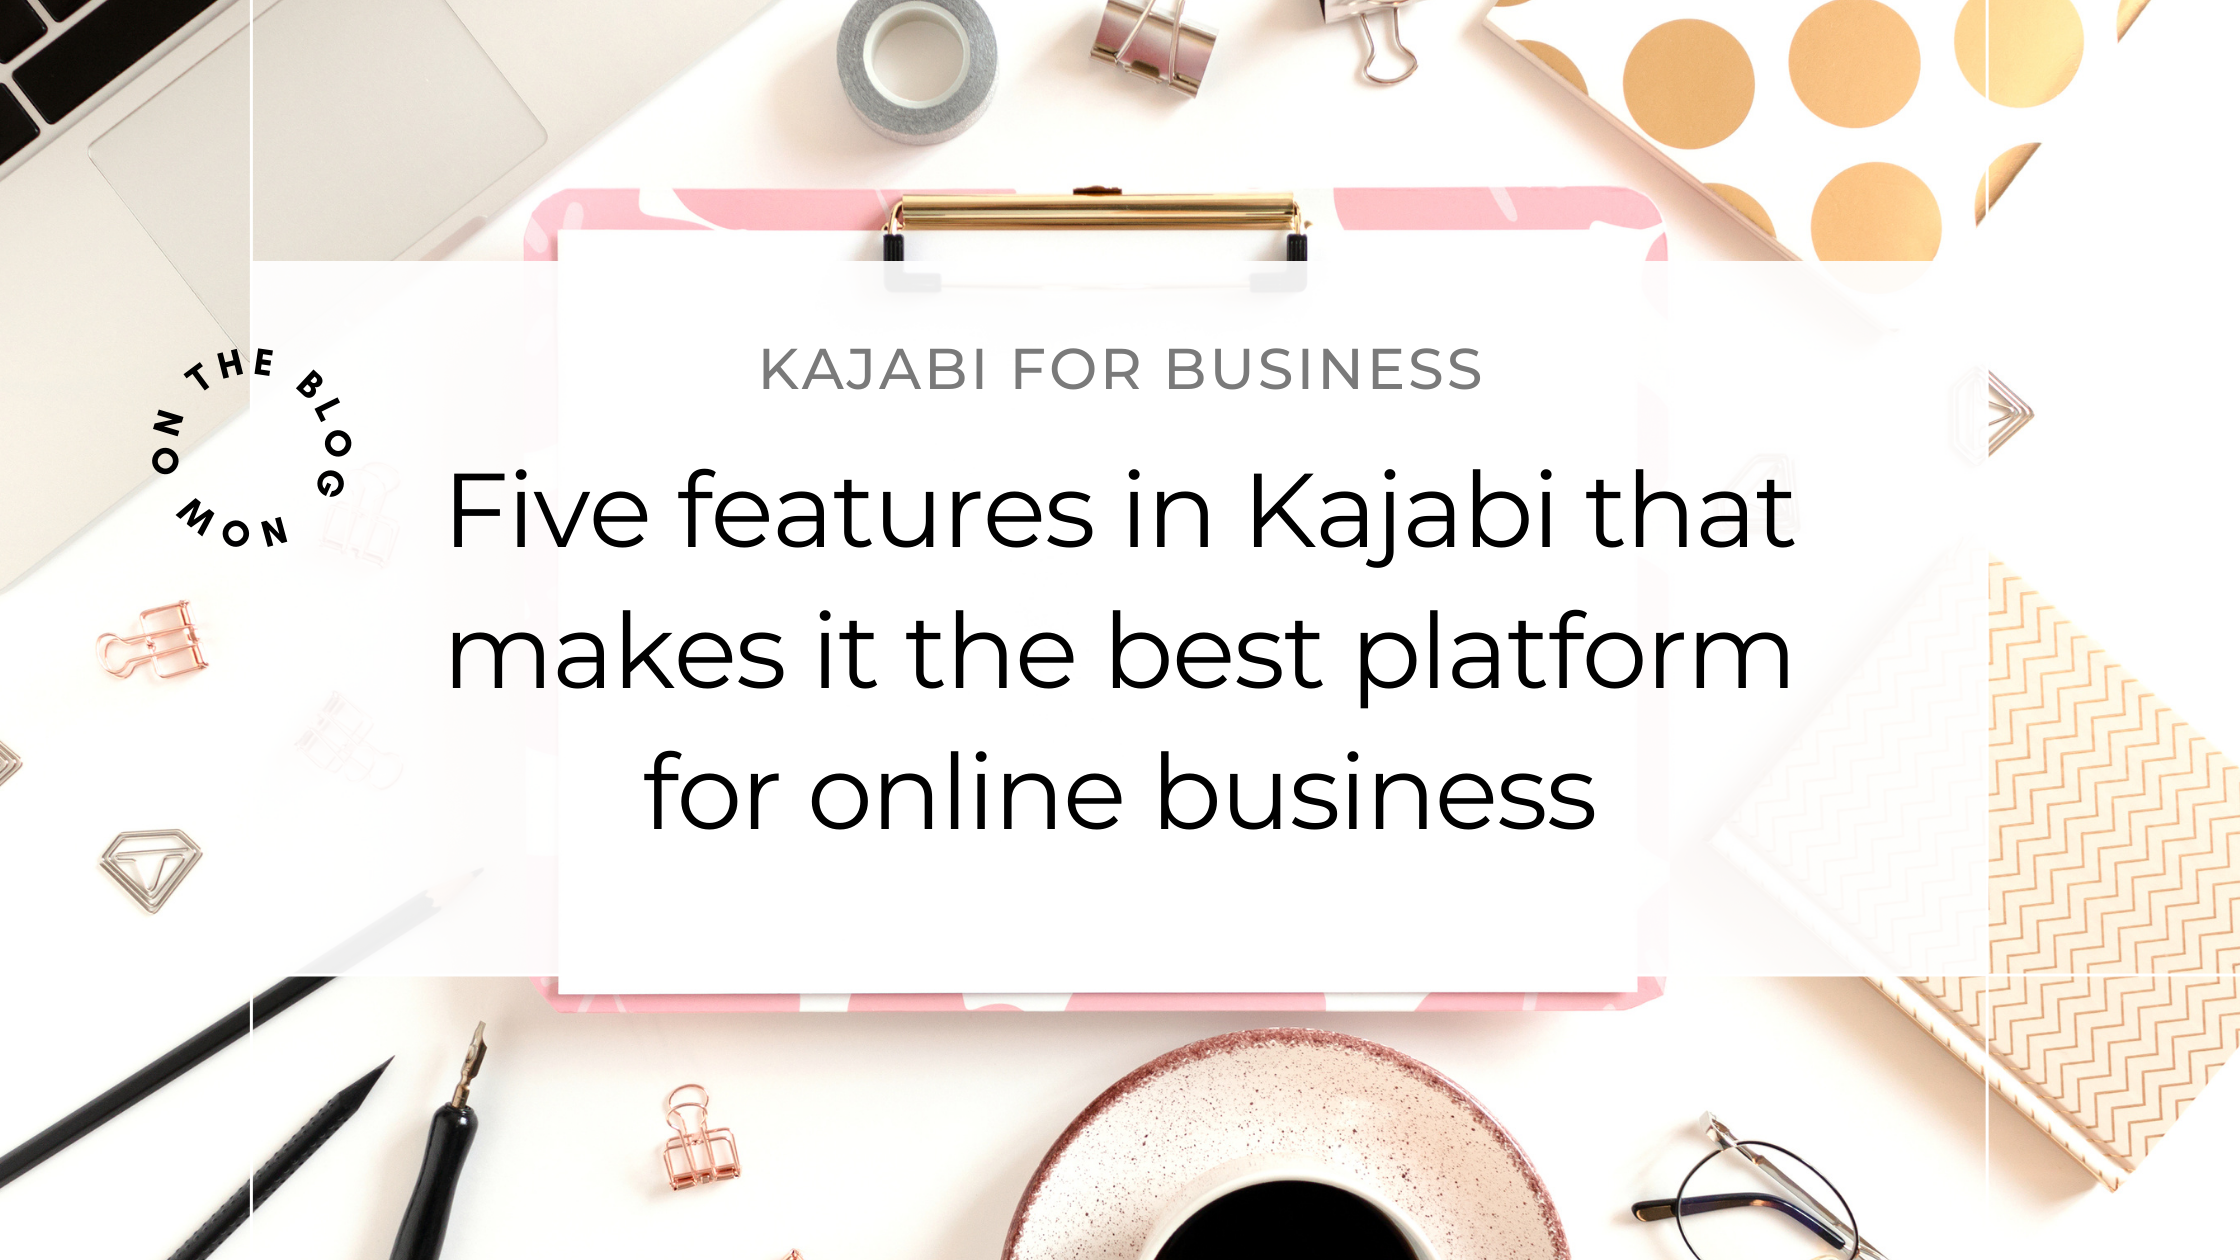 Five Features of Kajabi That Make It the Best Platform for Online Business Owners